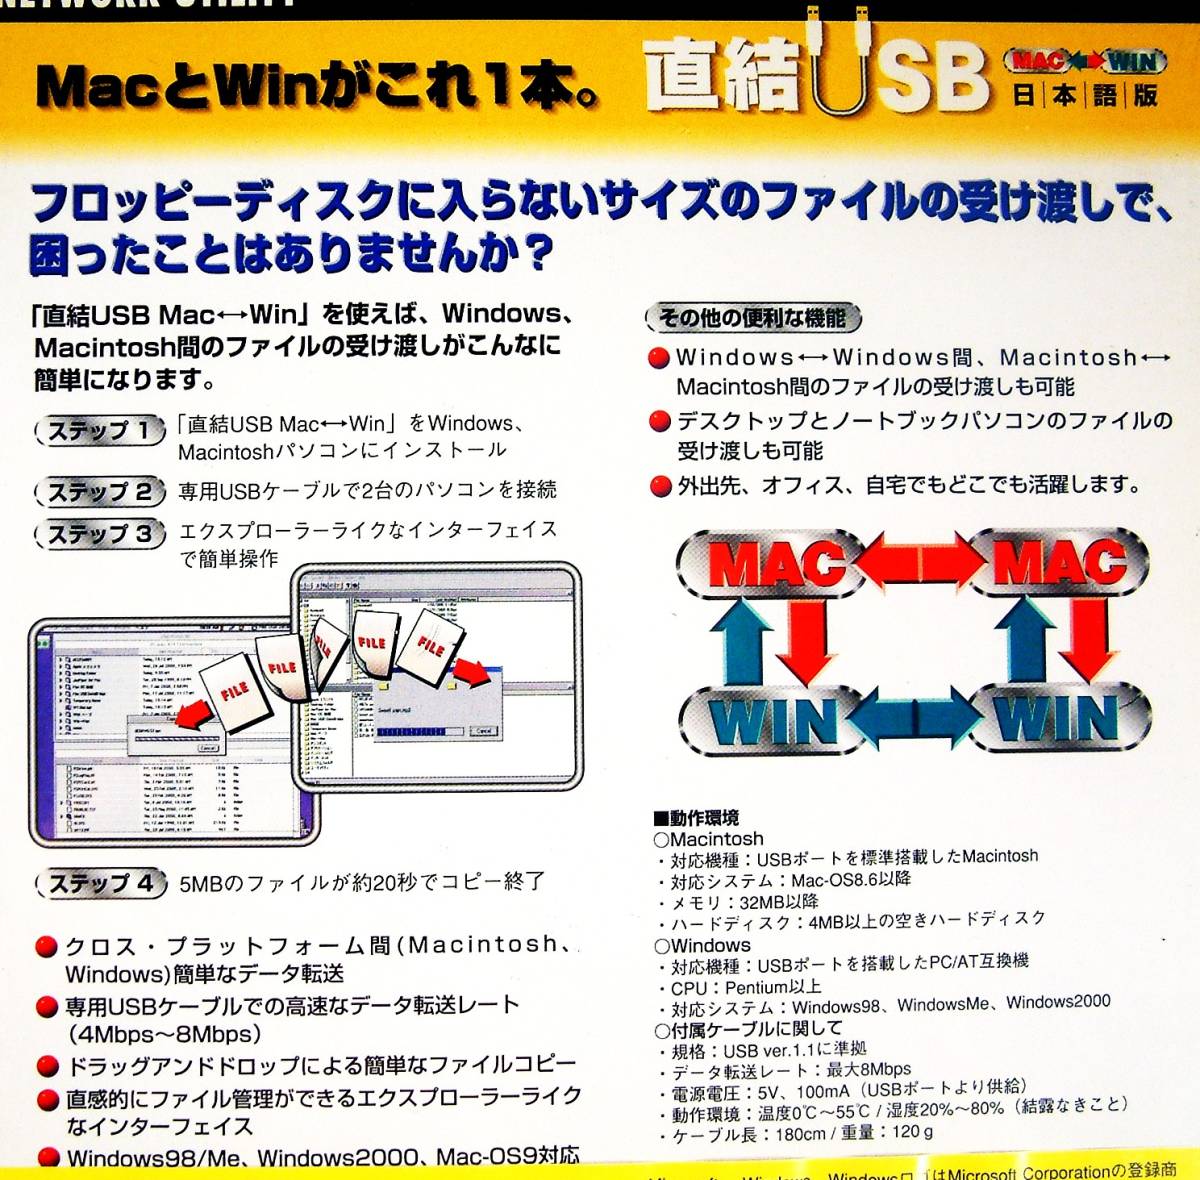 [3706] Quest direct connection USB Mac--Win new goods Windows-Macintosh interval data transfer soft file also have remote * wake * up free eye light 